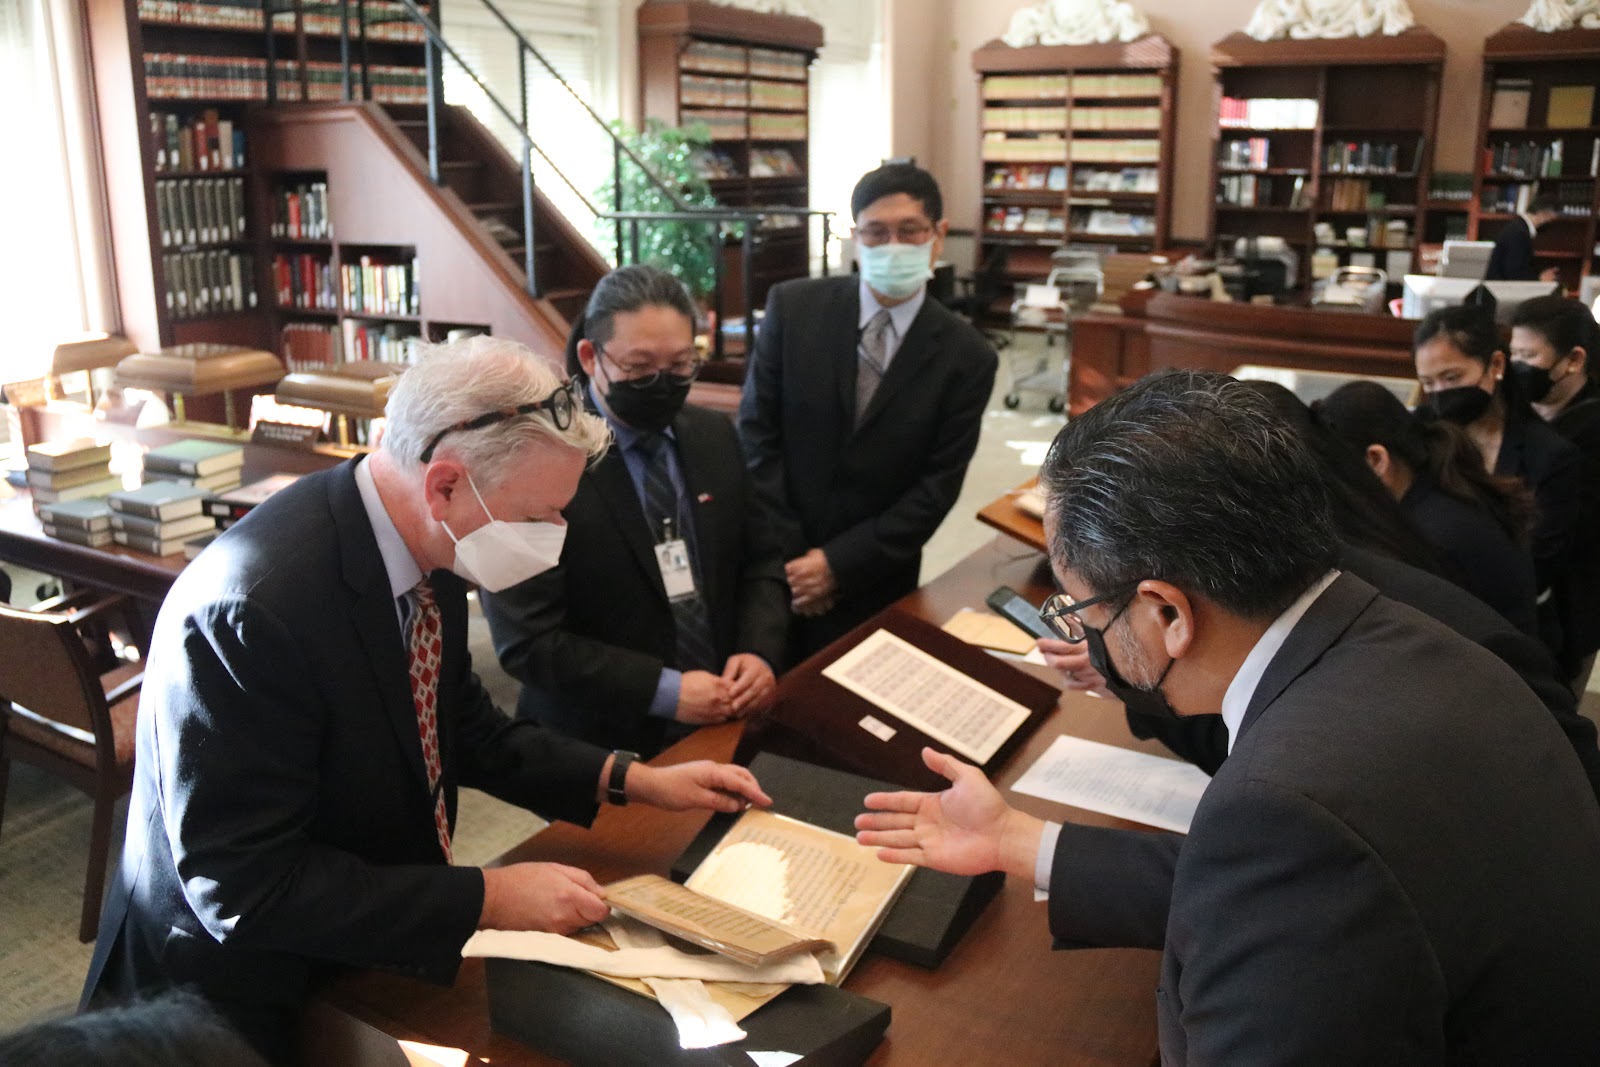 The Asian Division of the Library of Congress presents their Philippine collection to Embassy officials at the Asian Reading Room, including the only known extant copy of Doctrina Christiana.